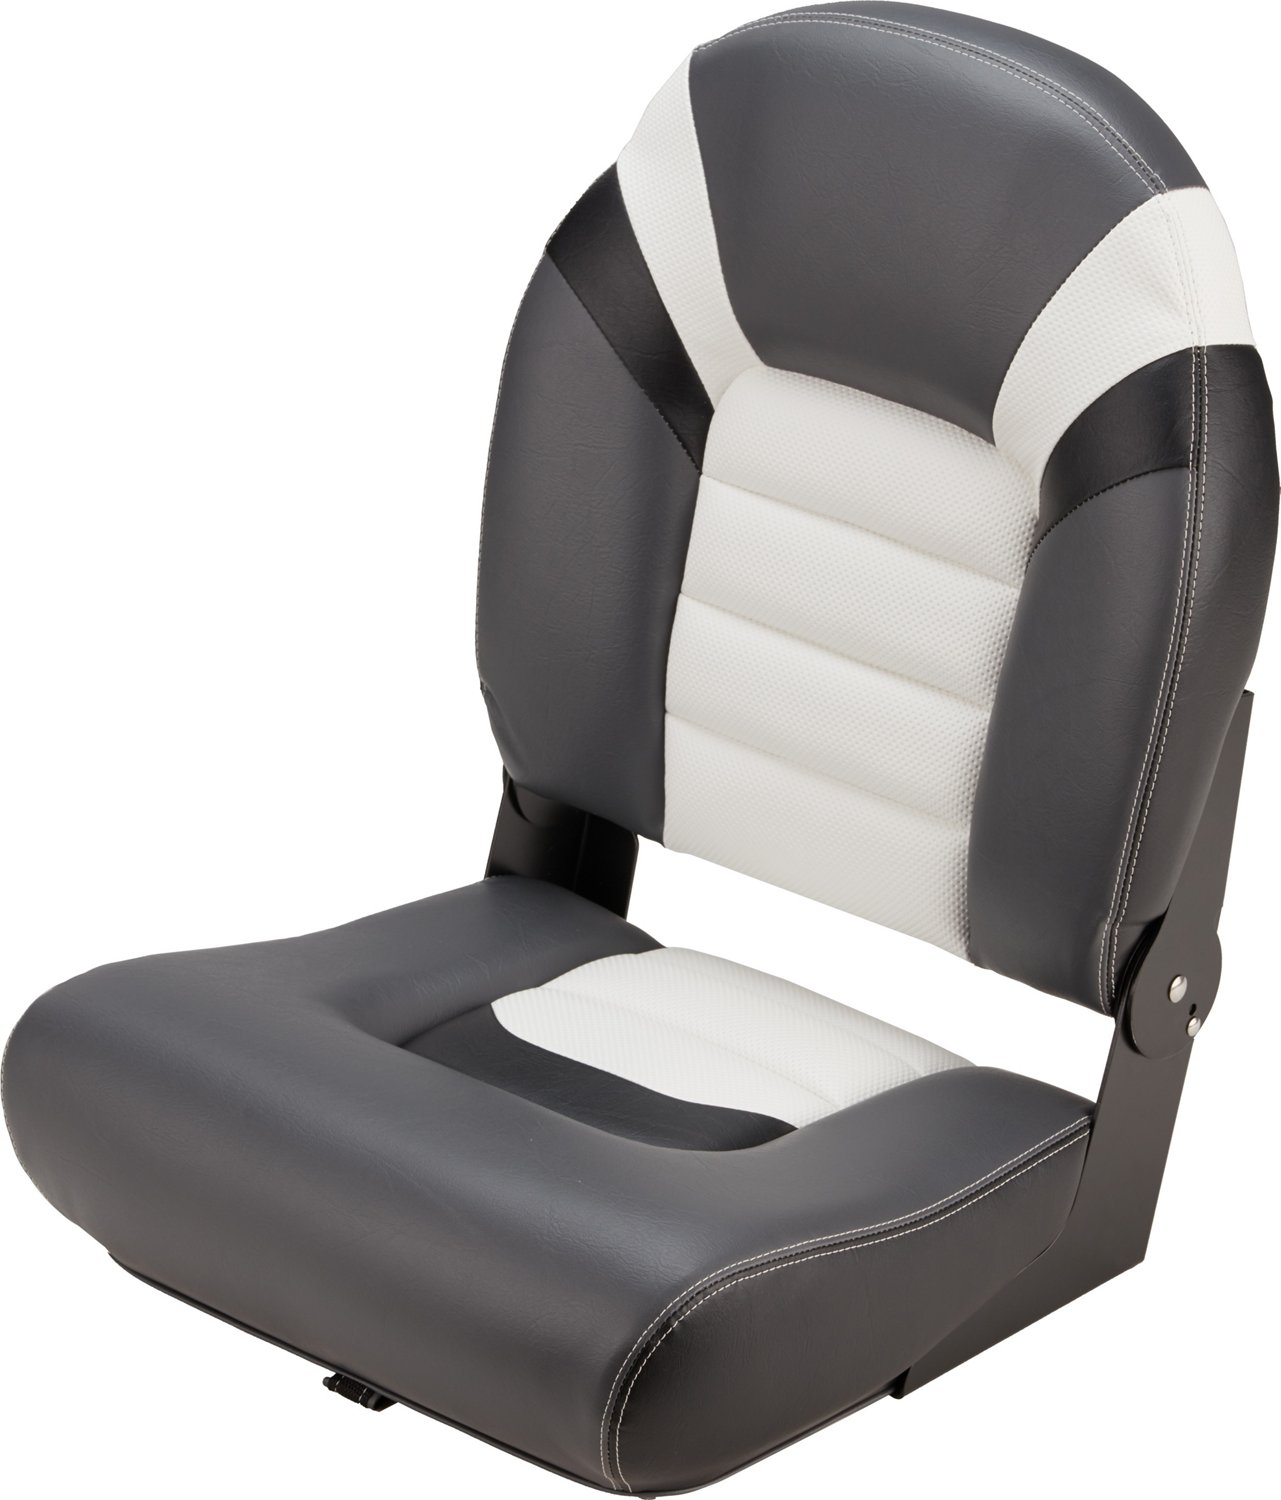 Deluxe High Back Folding Boat Seat - Comfort & Durability